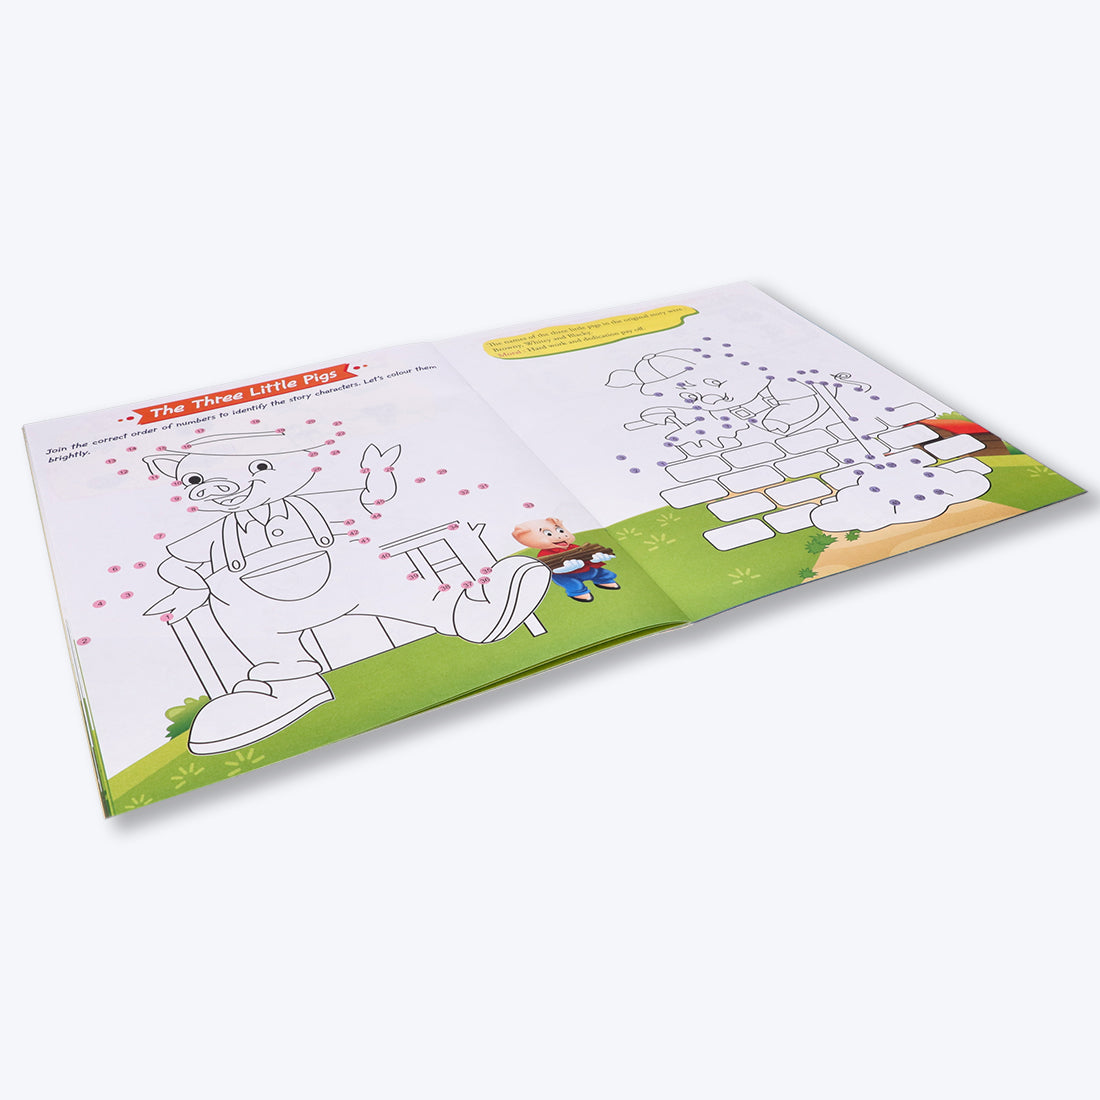 Trail the dots is a theme-based carefully levelled series that includes interesting puzzles that will excite your child.